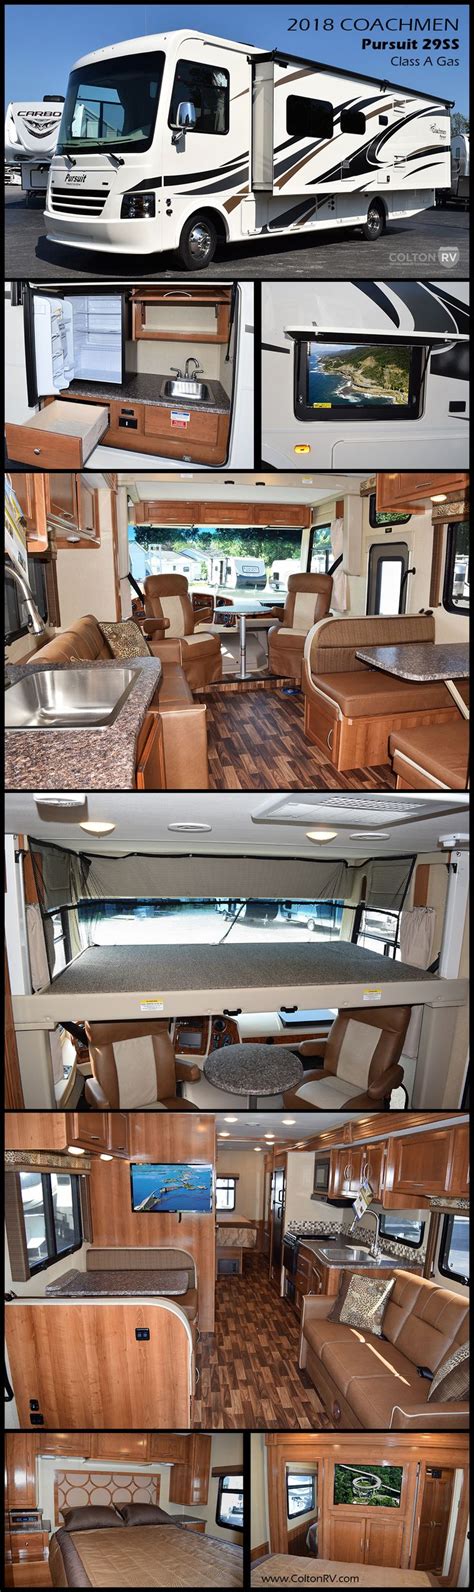 Take A Look At This 2018 Coachmen Pursuit 29ss Class A Gas Motorhome